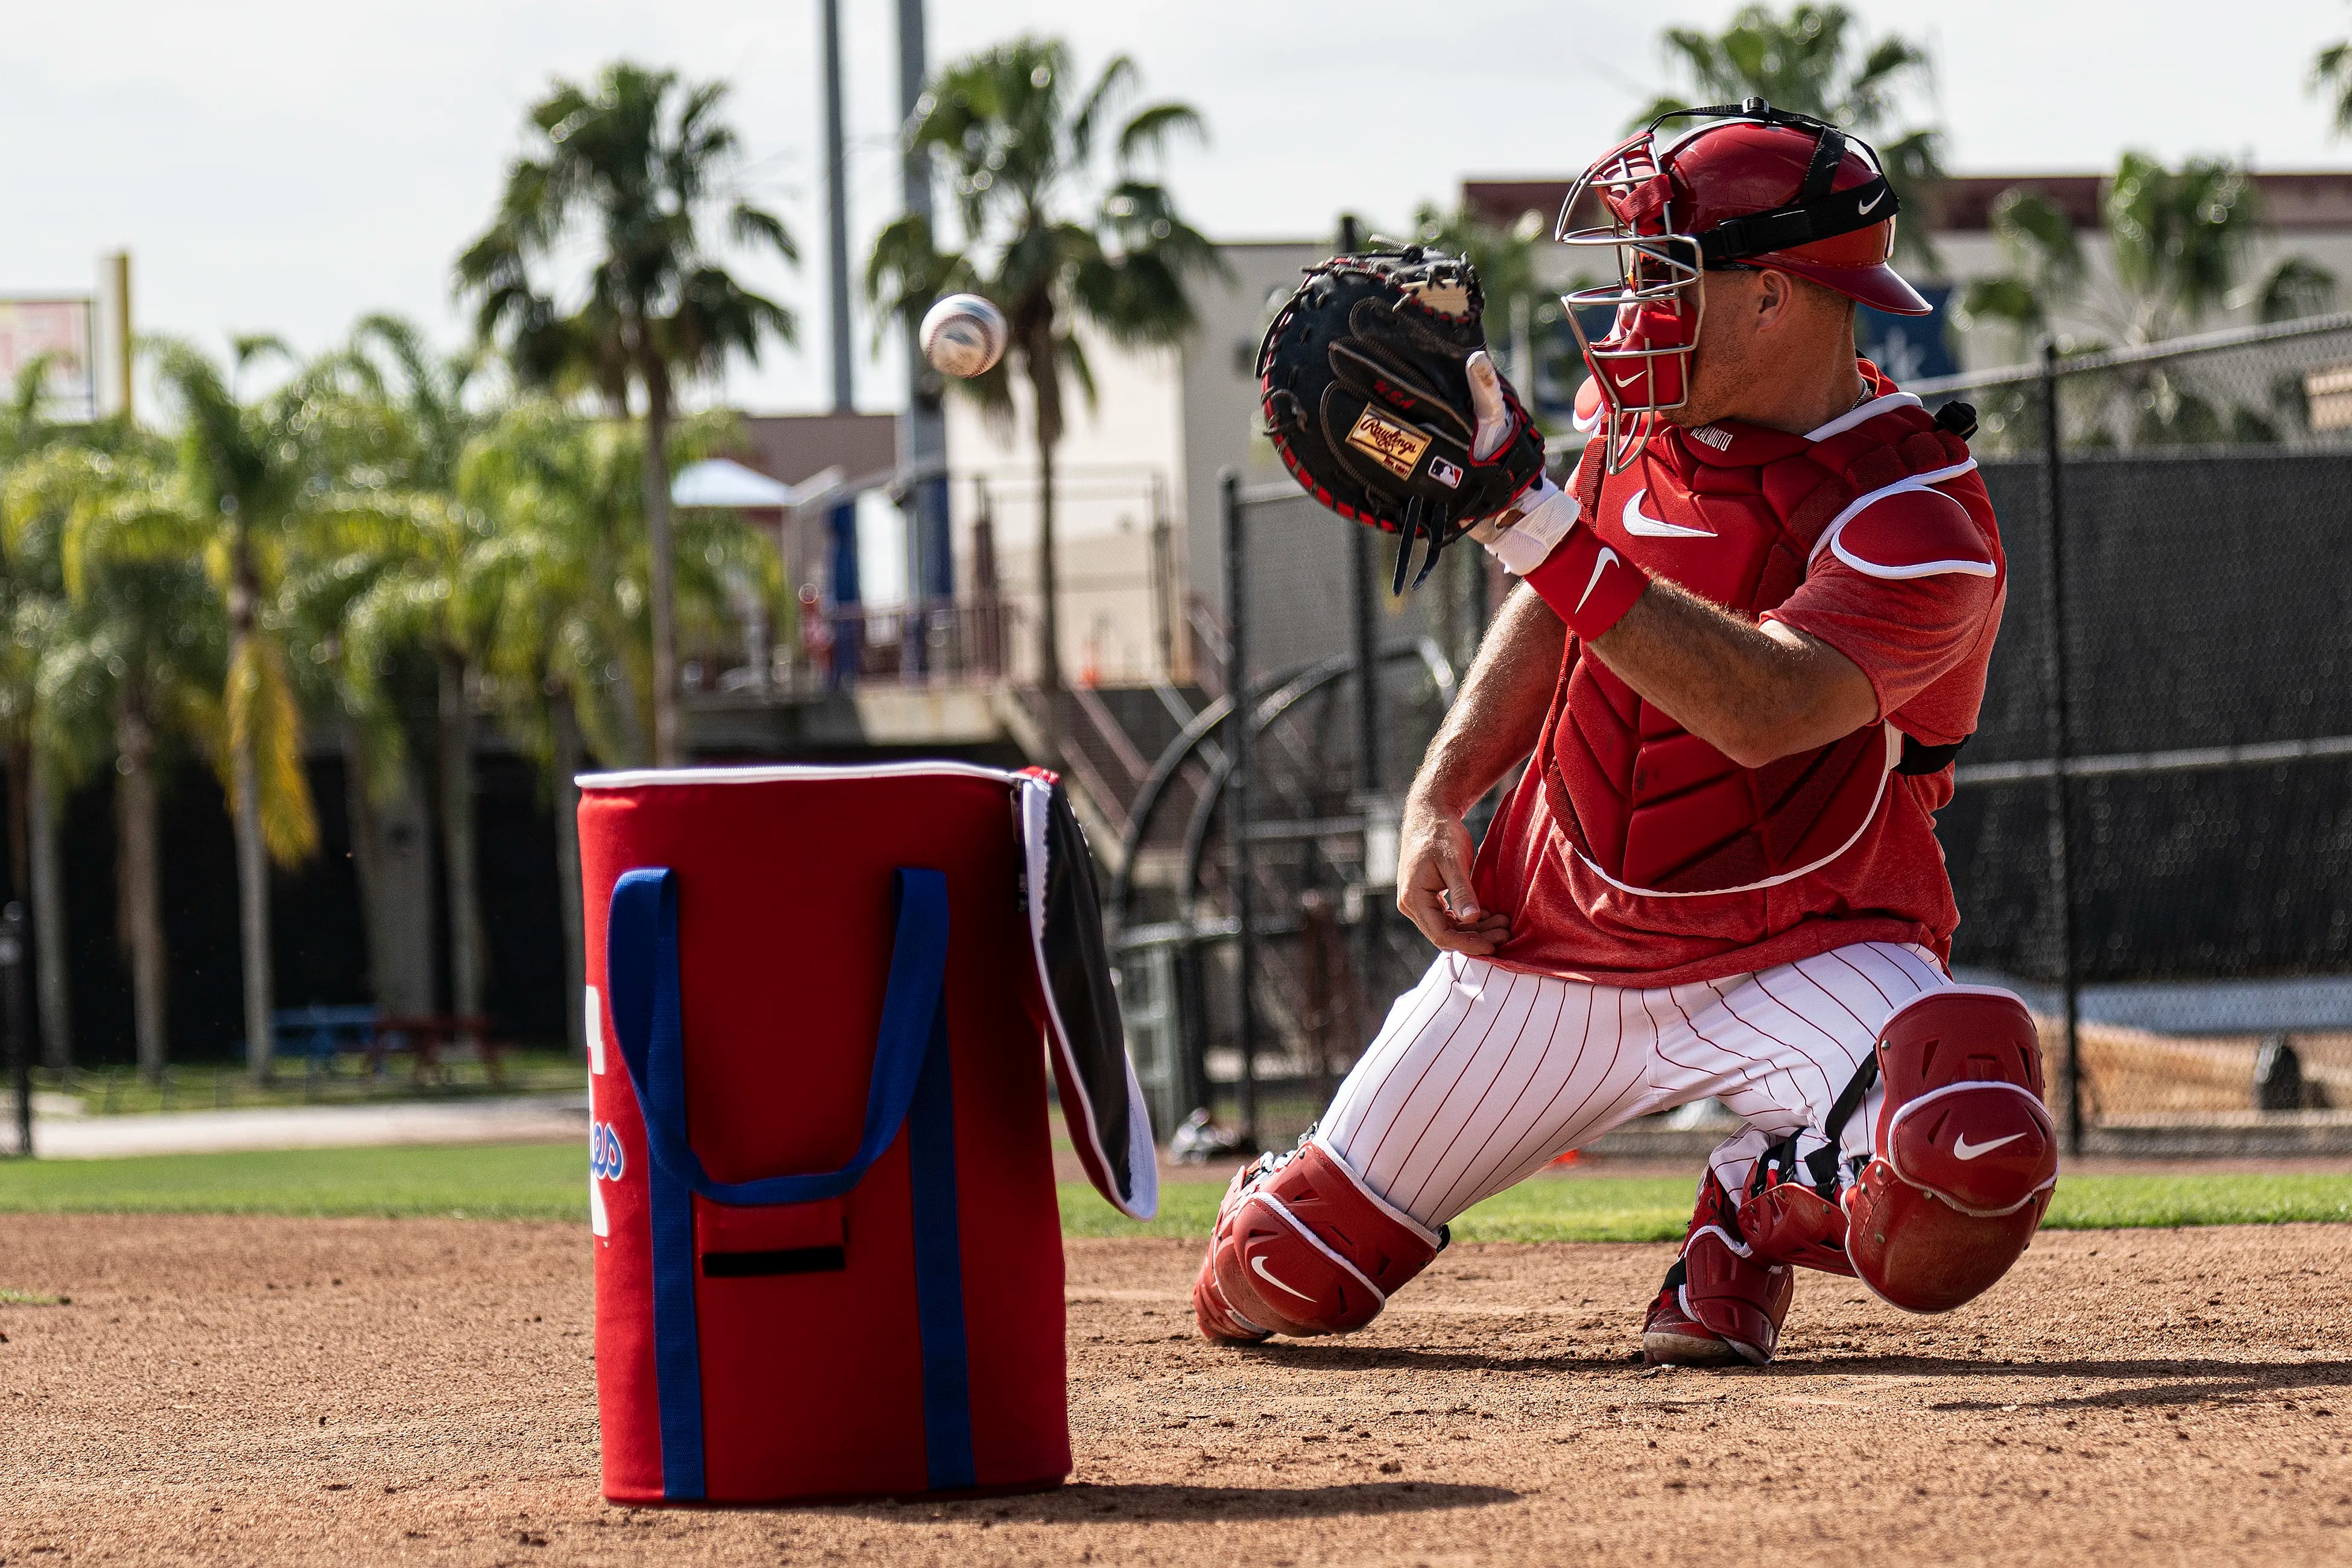 See photos from Sunday's Phillies spring training workout